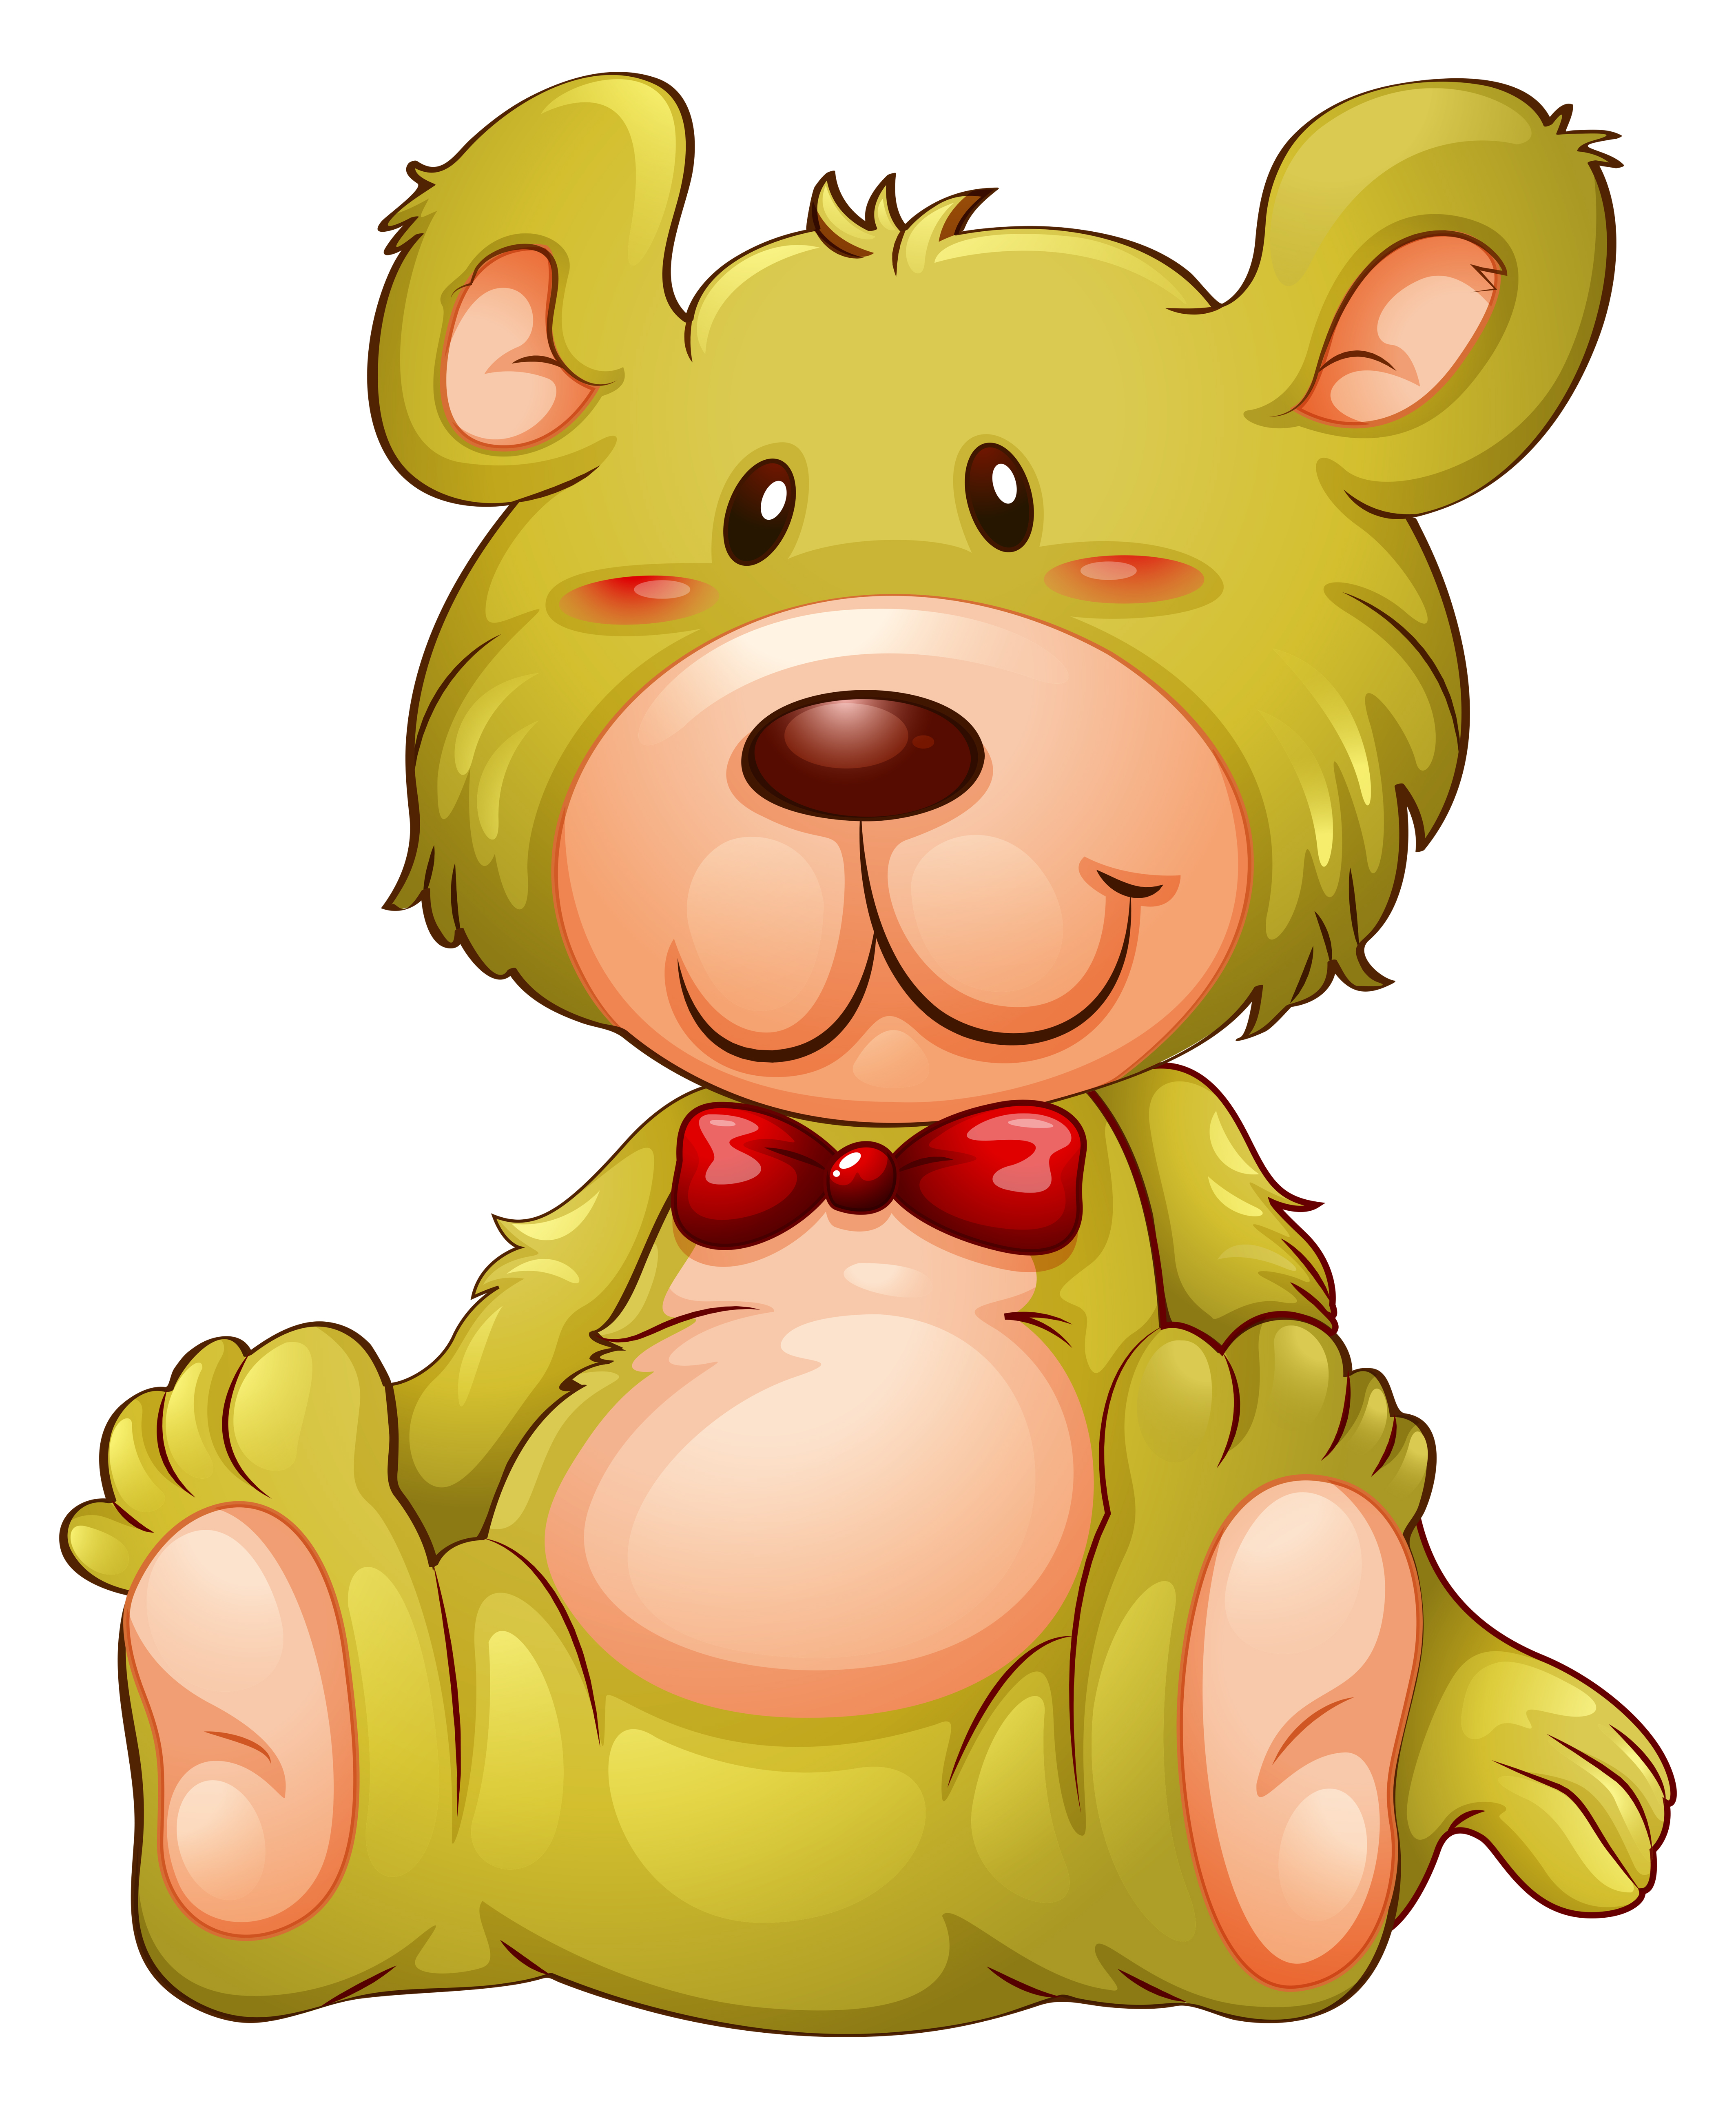 Download A yellow teddy bear - Download Free Vectors, Clipart ...